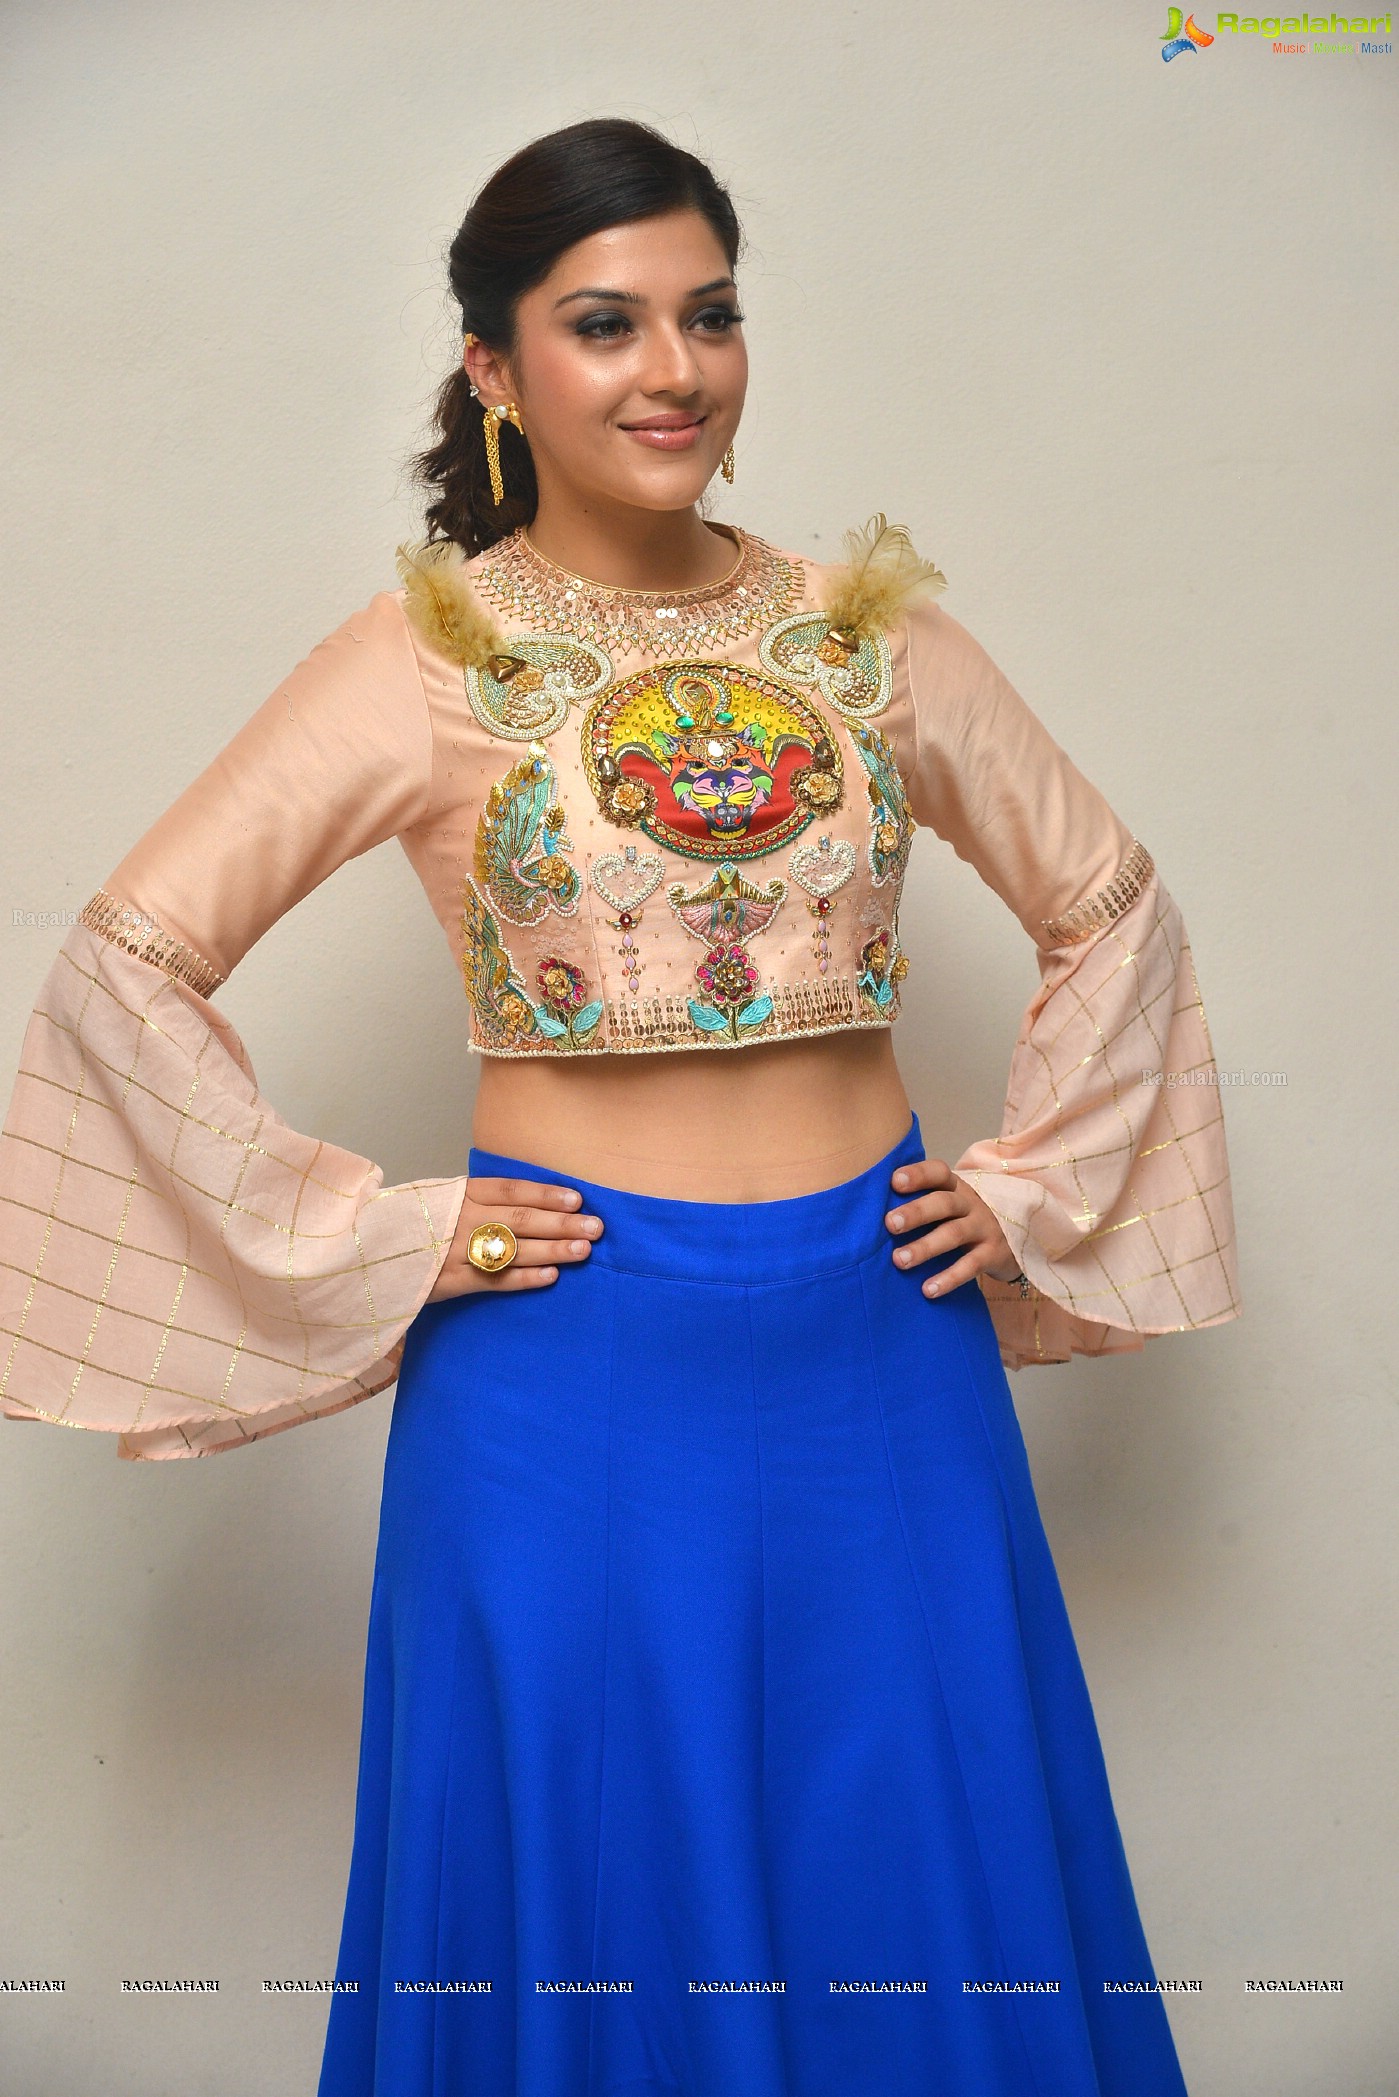 Mehreen Pirzada at Raja The Great Trailer Launch (Posters)